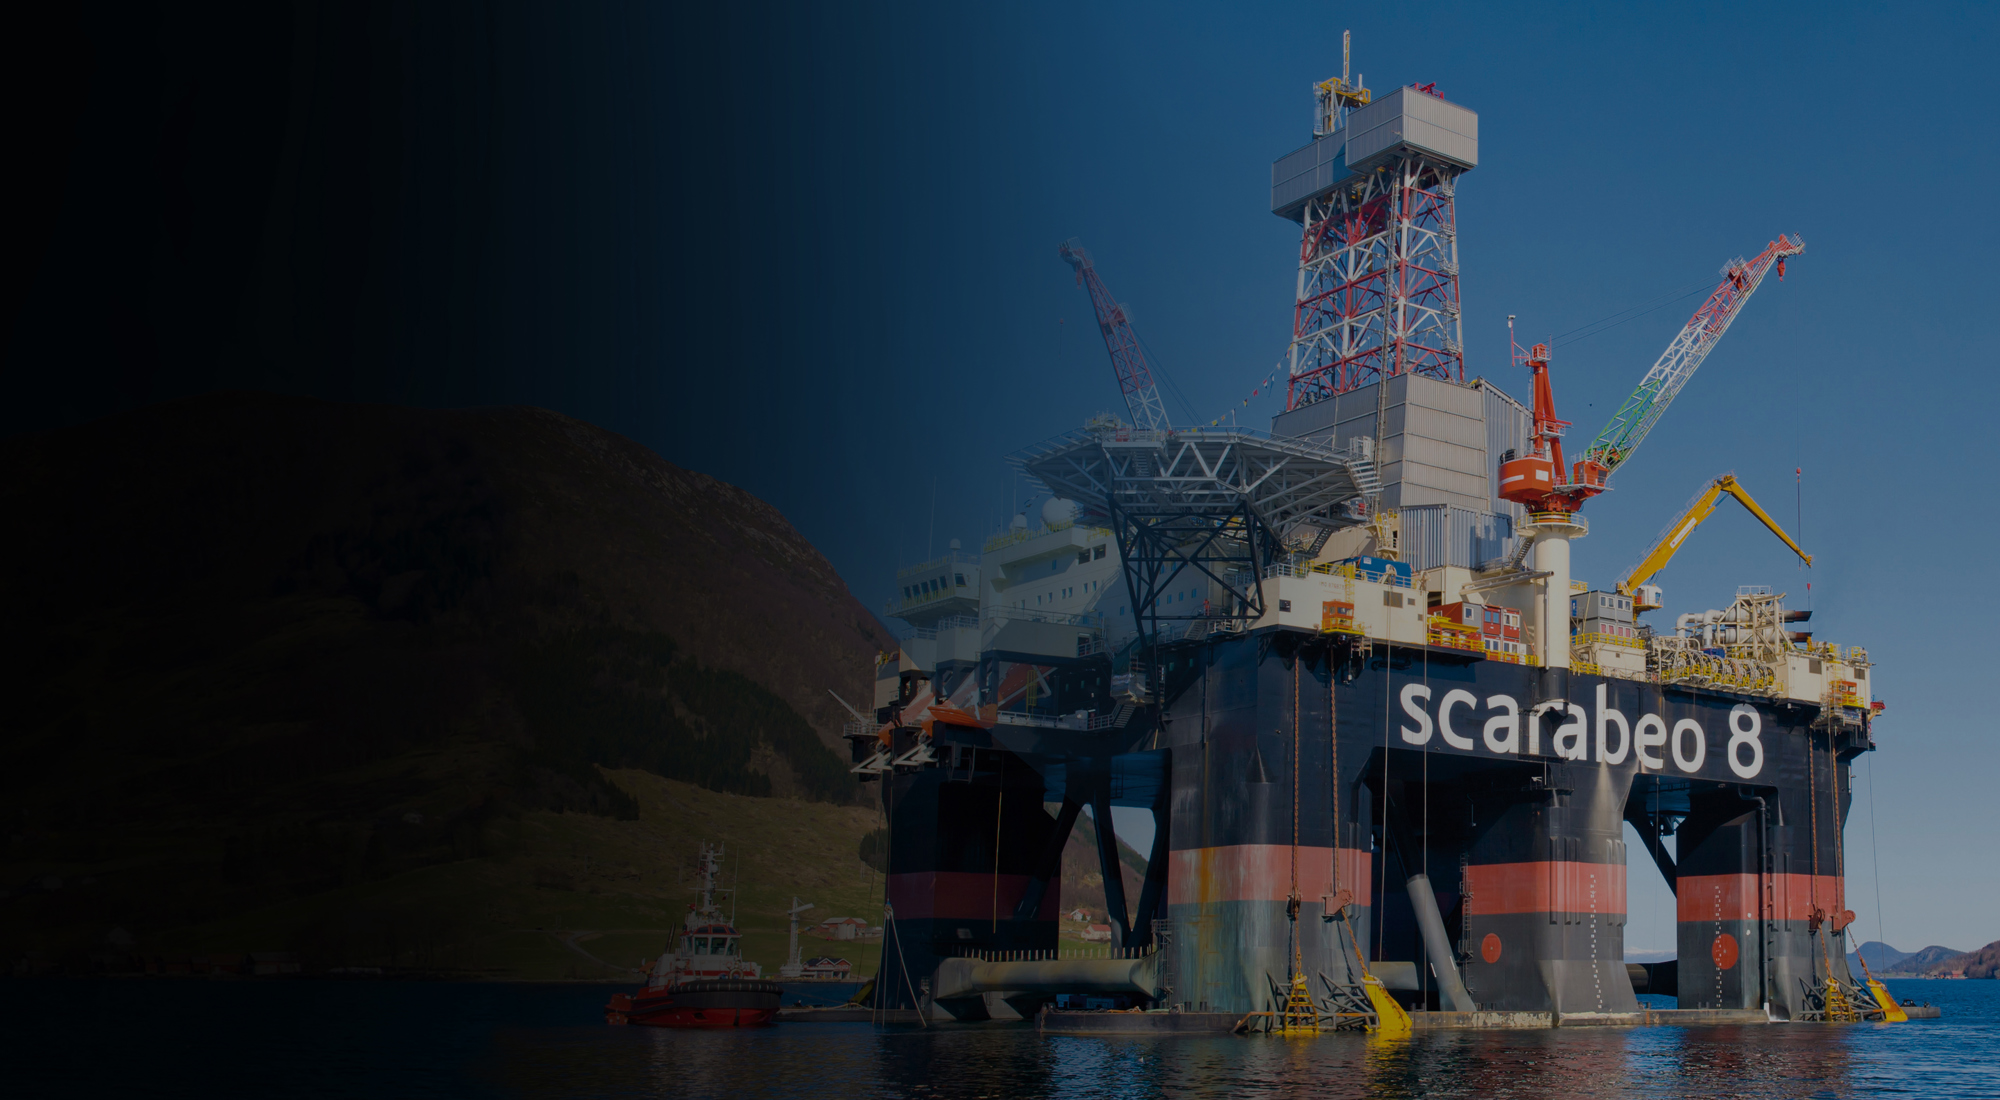 The Scarabeo 8 oil rig